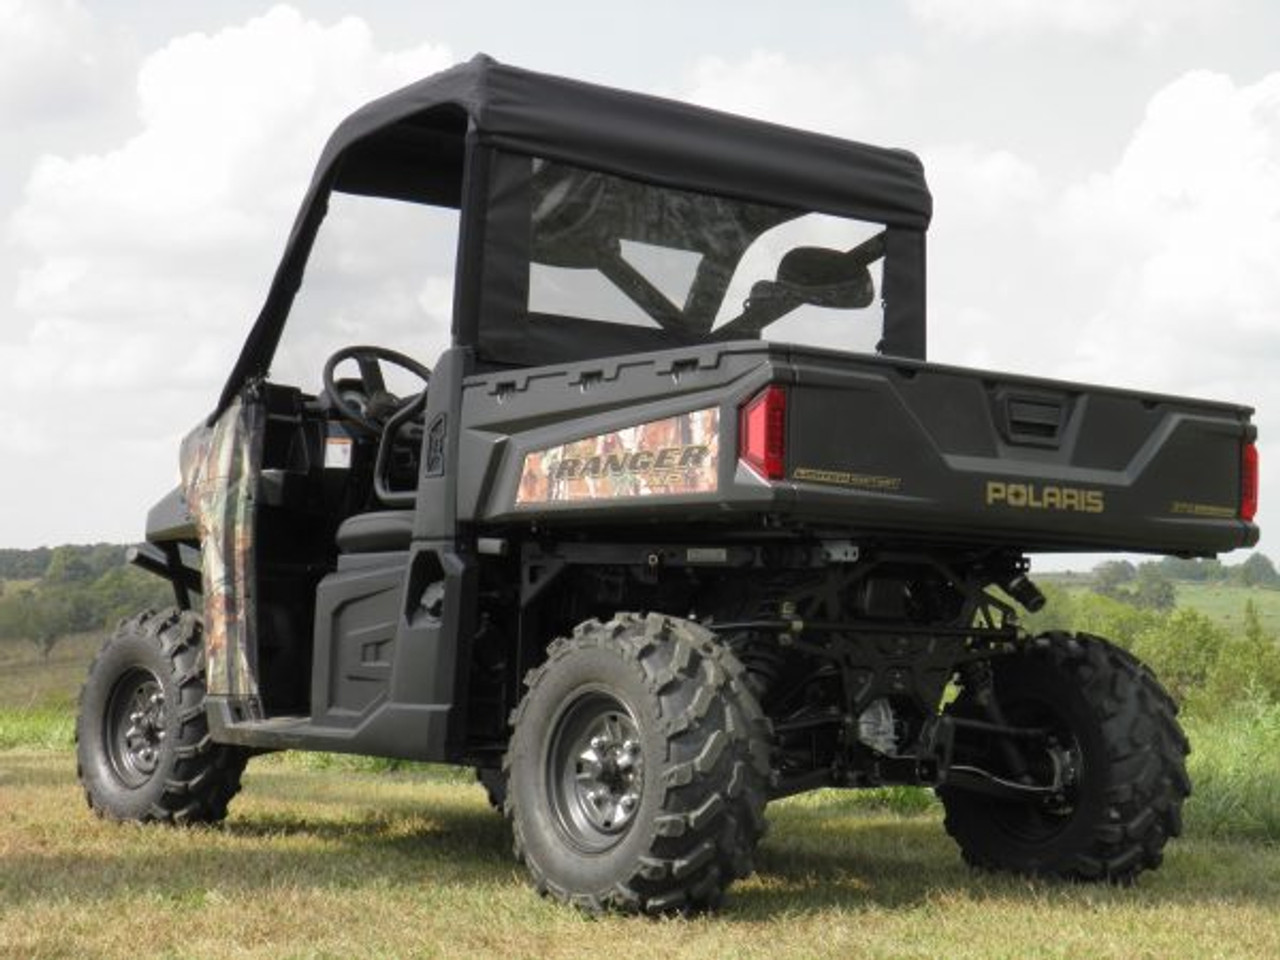 3 Star side x side Polaris Ranger XP570 XP900 XP1000 1000 vinyl windshield, roof and rear window rear angle view